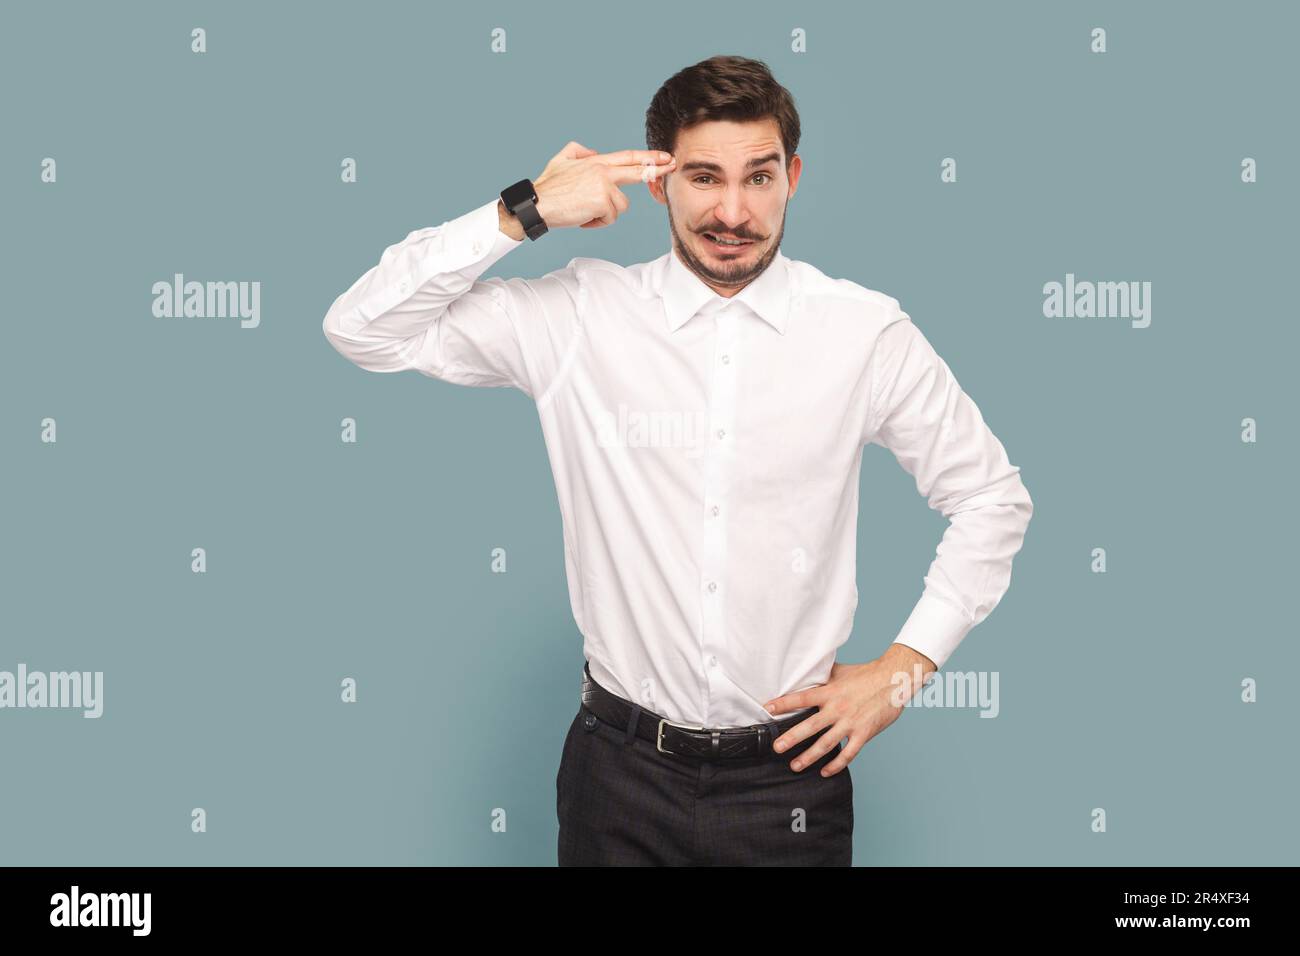 Portrait of depressed attractive man with mustache holding fingers gun near his temple, being in bad mood and stress, wearing Indoor studio shot isolated on light blue background. Stock Photo